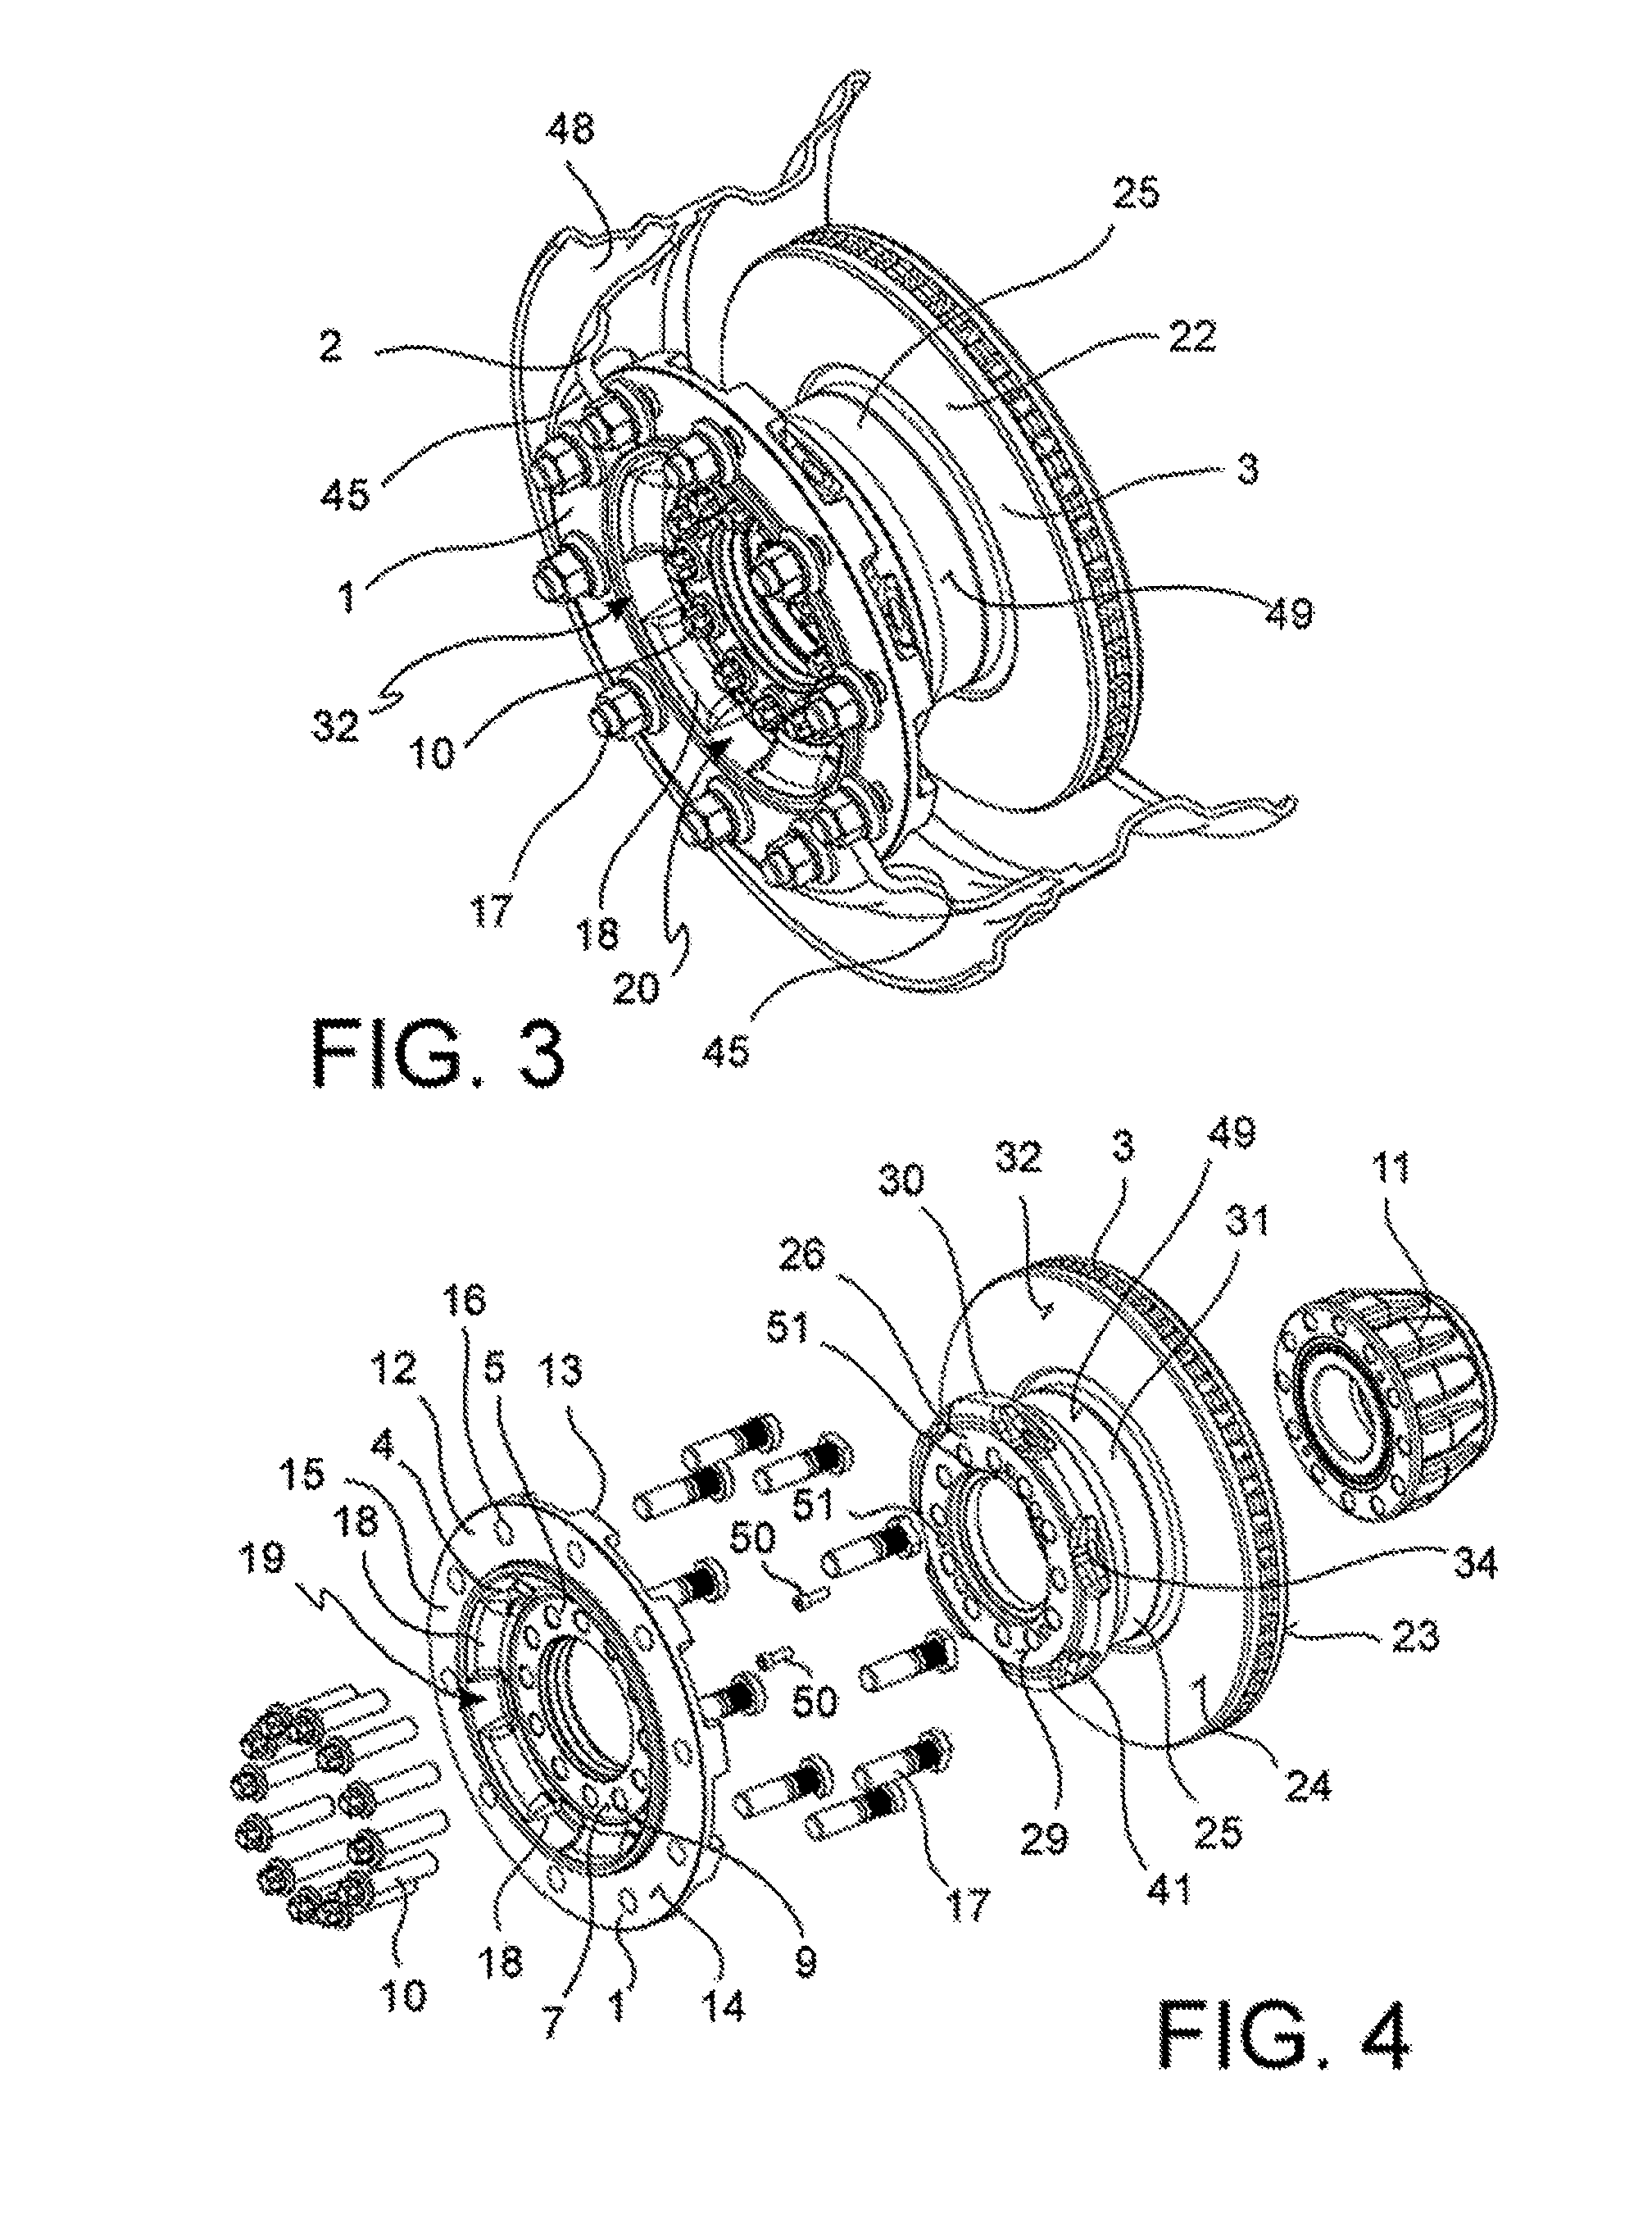 Assembly connection flange and brake disc